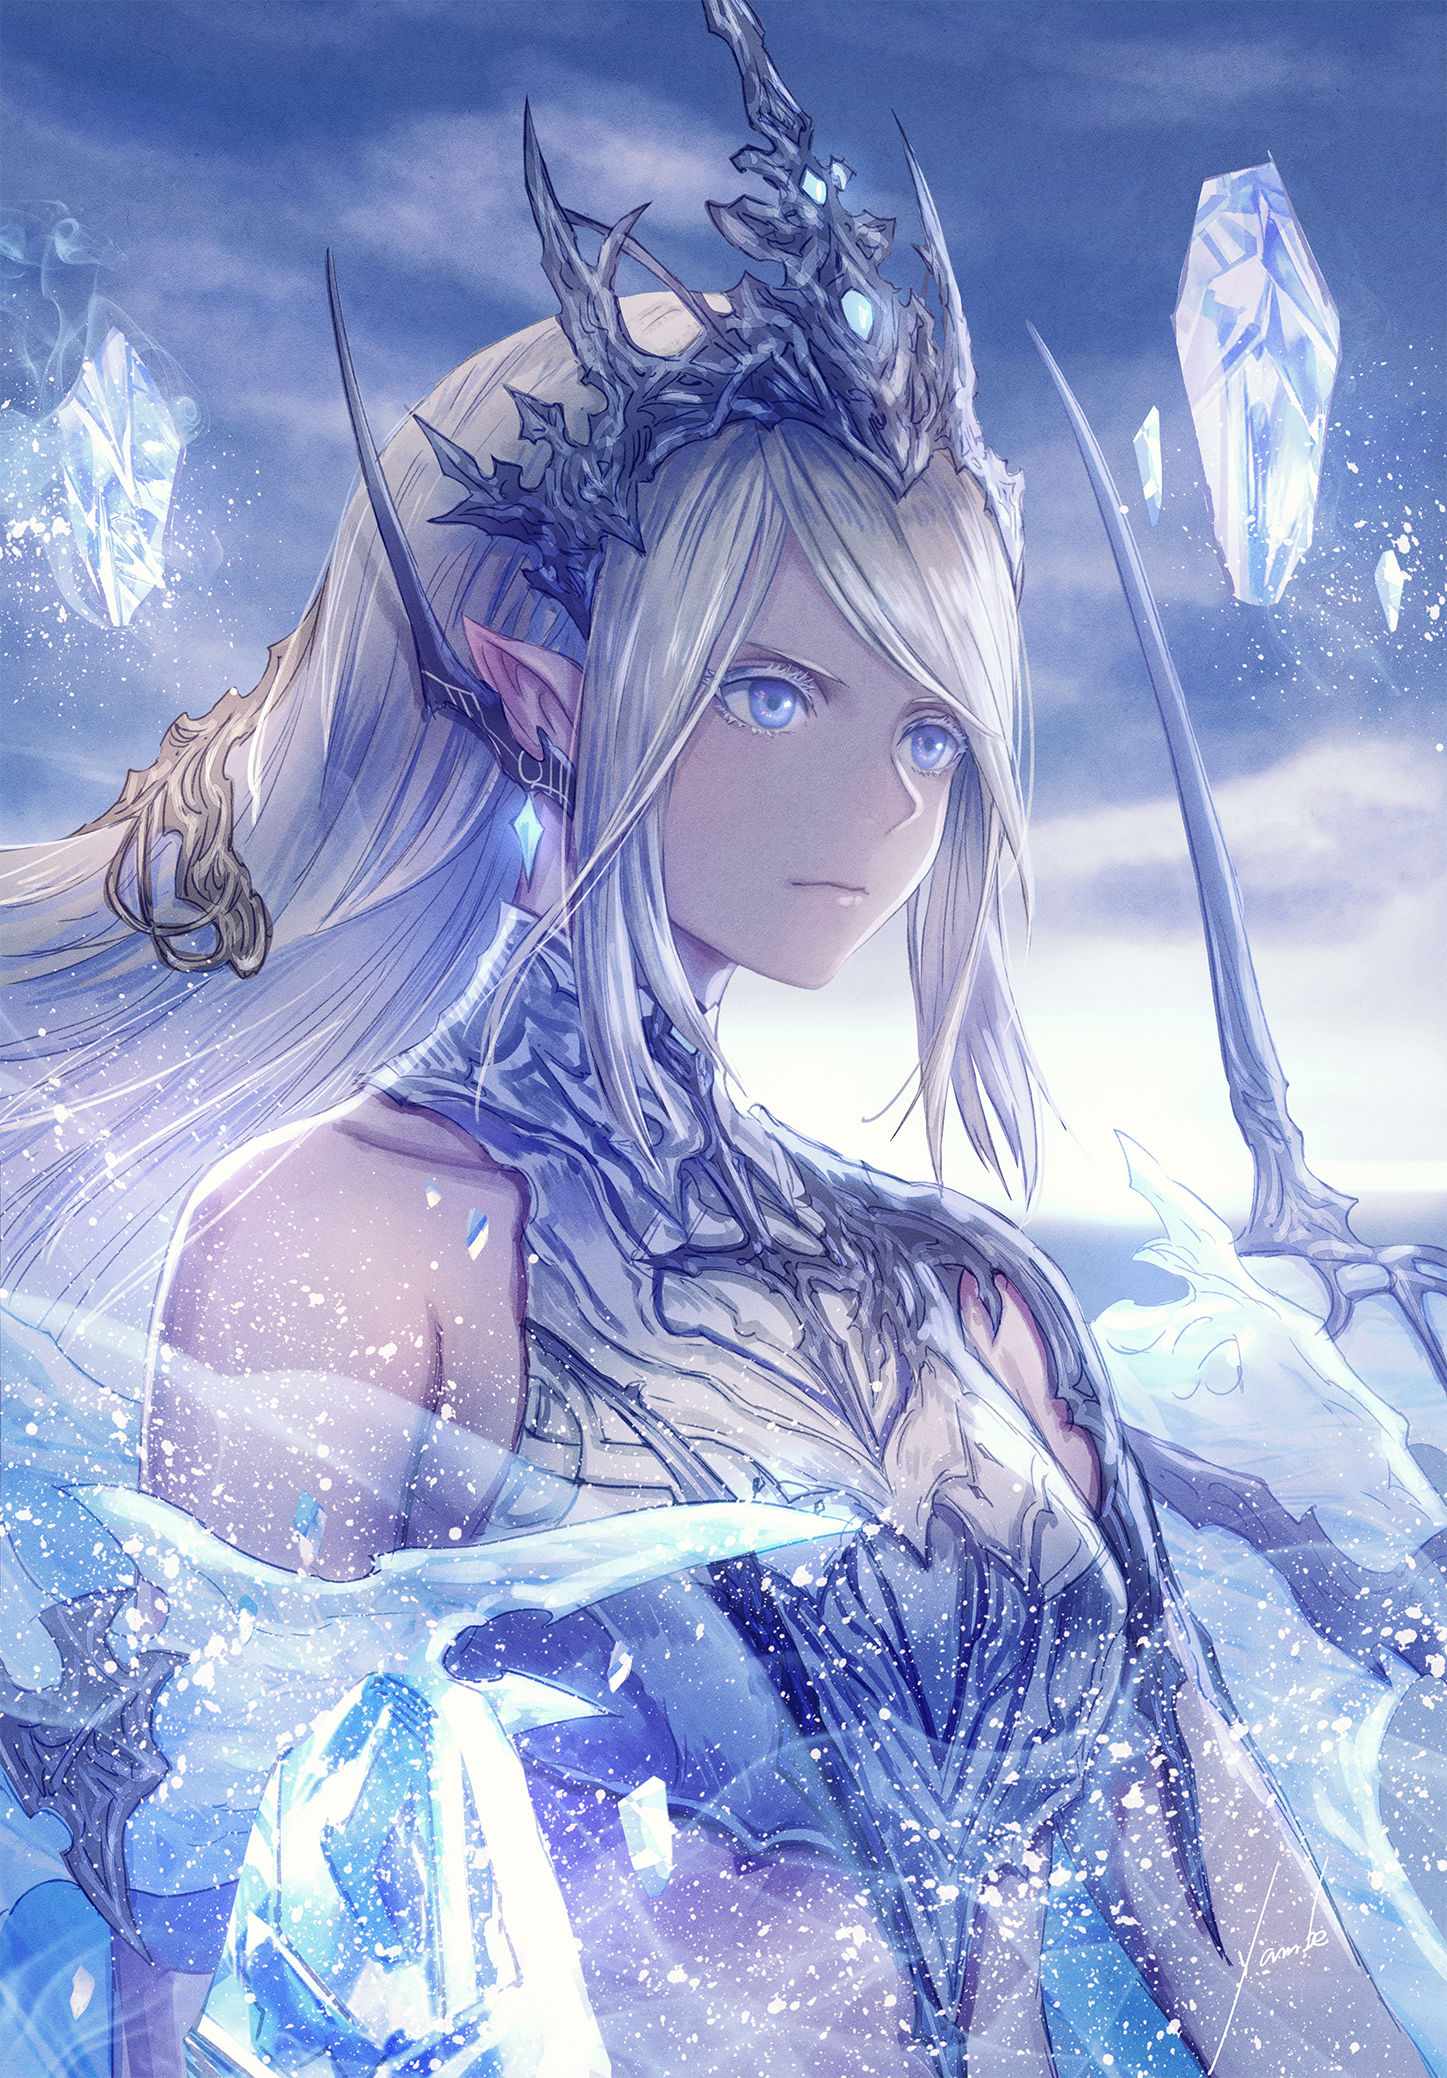 __shiva_final_fantasy_and_1_more_drawn_by_anbe_yoshirou__9fc1a4836c594fb81c0b6dae5cea0129.png